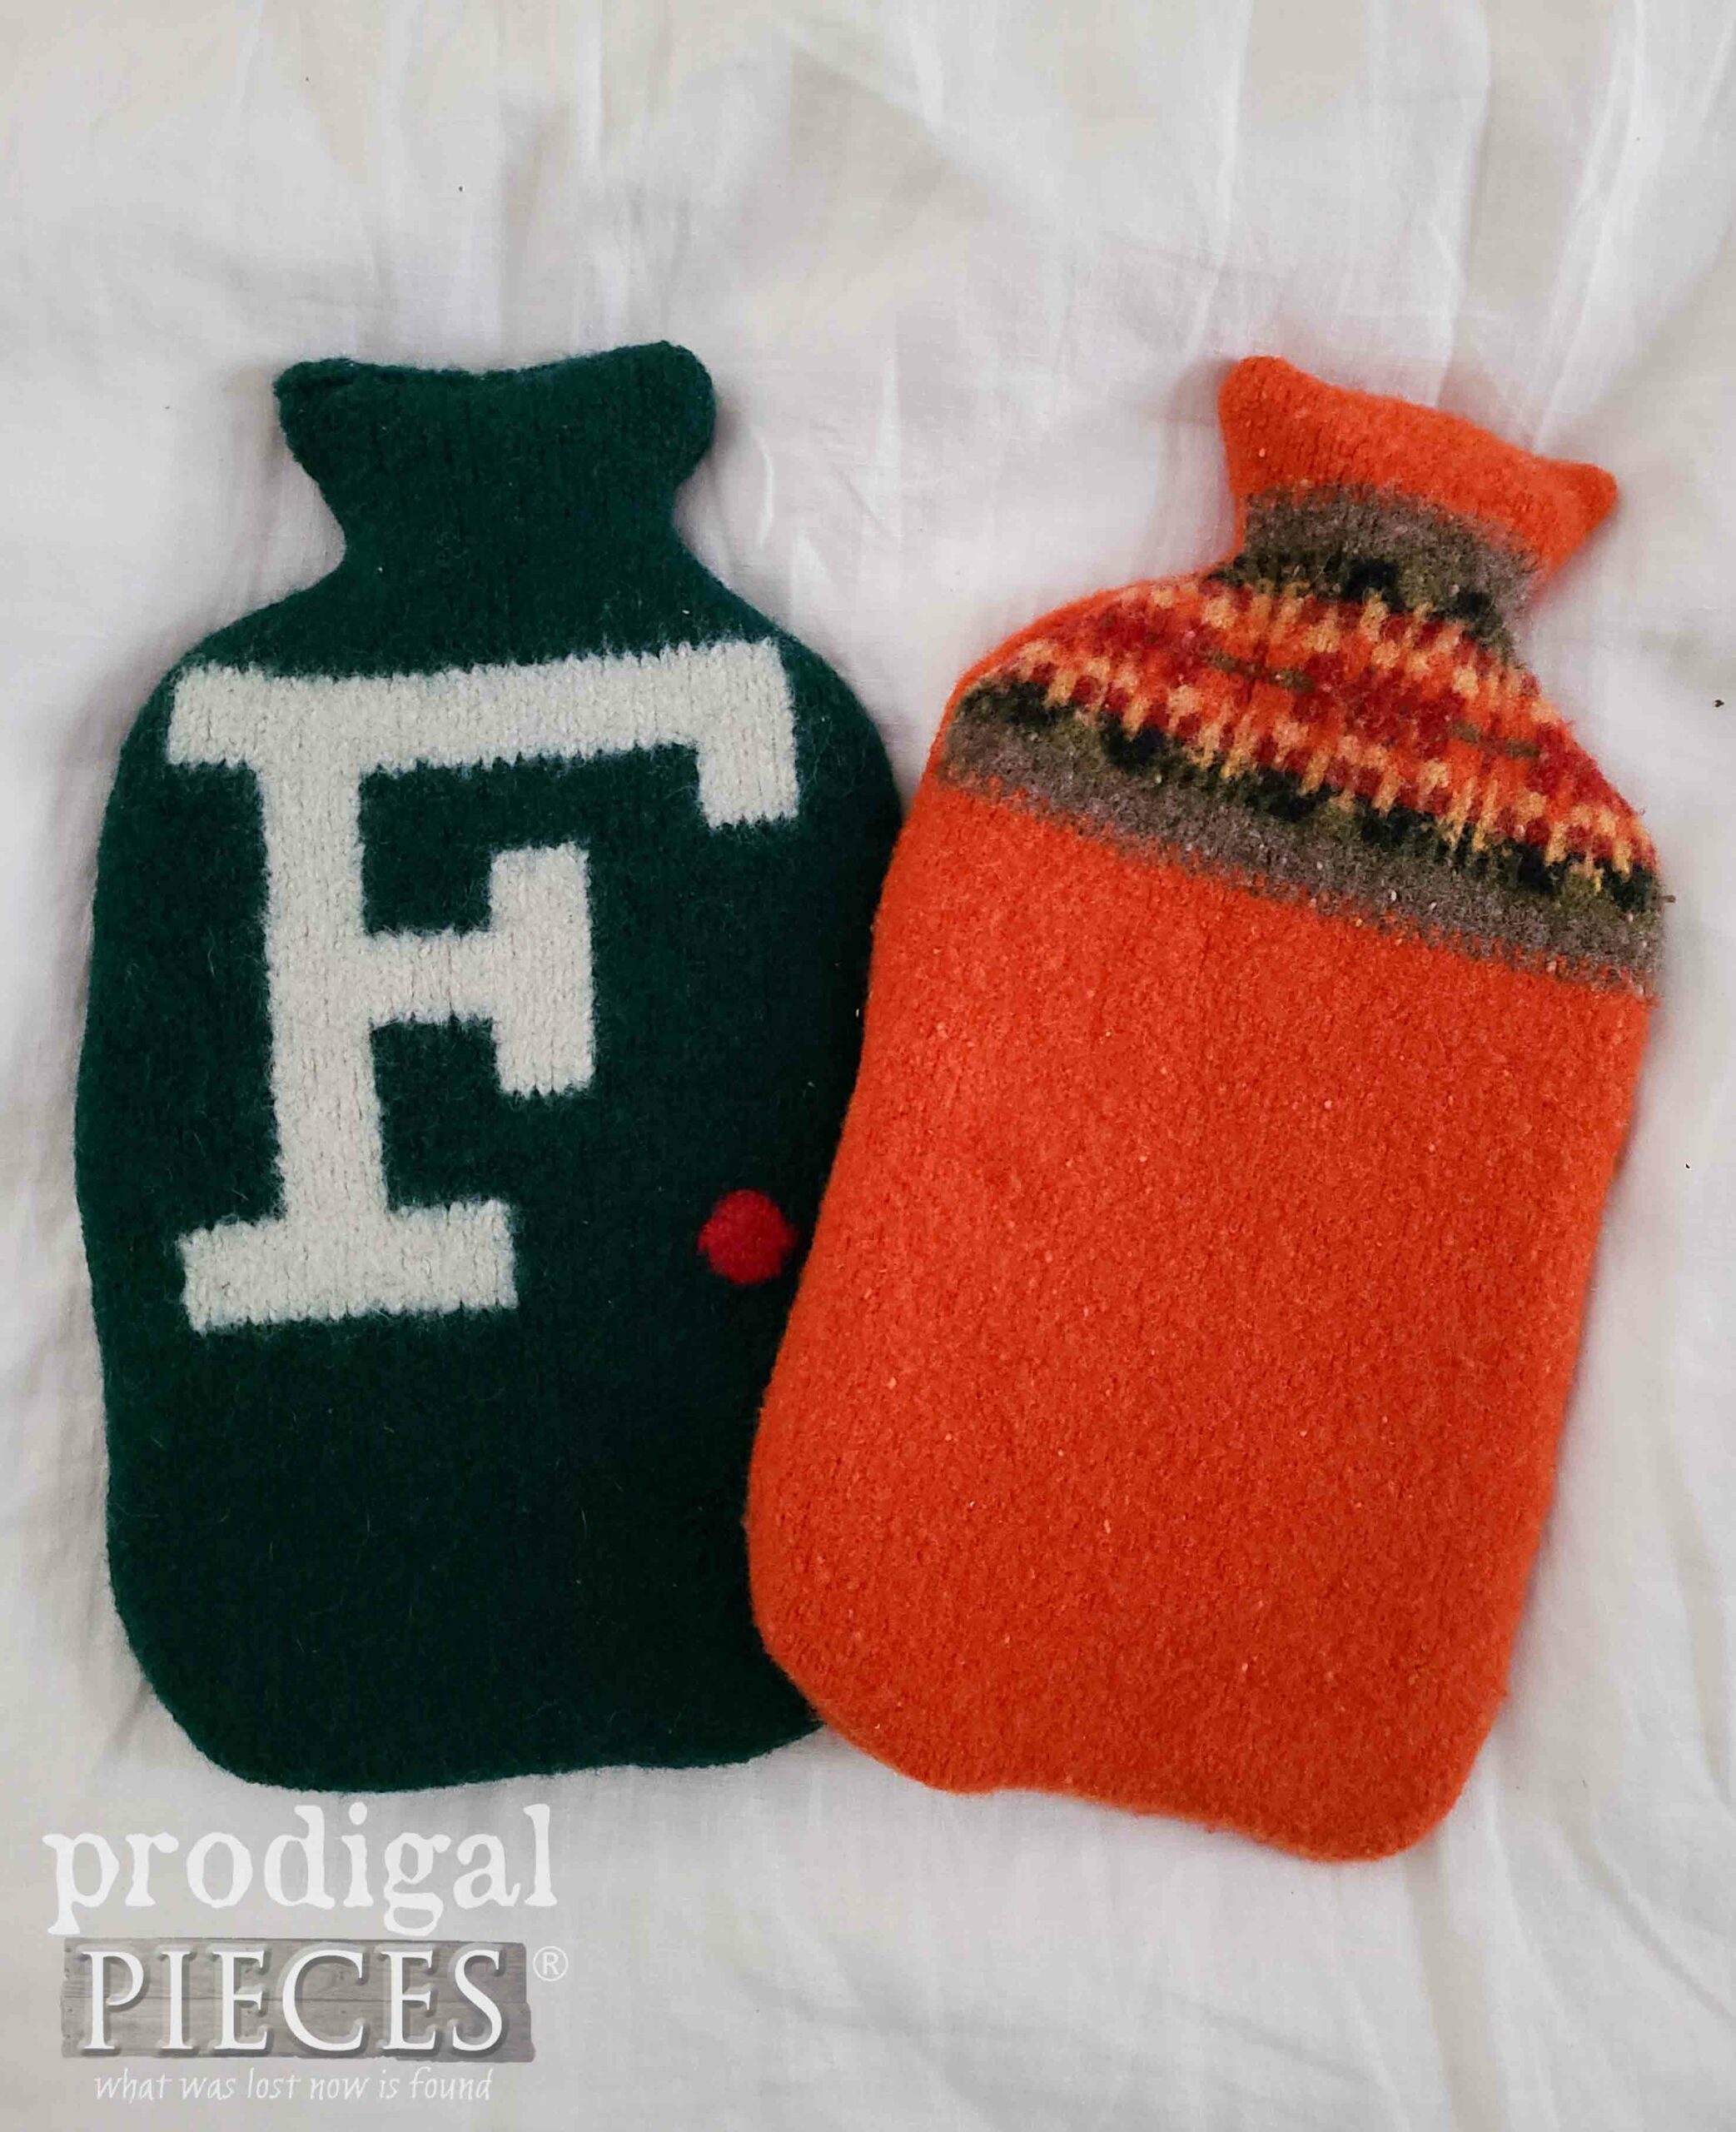 Two DIY Hot Water Bottle Covers from Felted Sweaters by Larissa of Prodigal Pieces | prodigalpieces.com #prodigalpieces #felted #selfcare #giftidea #upcycled